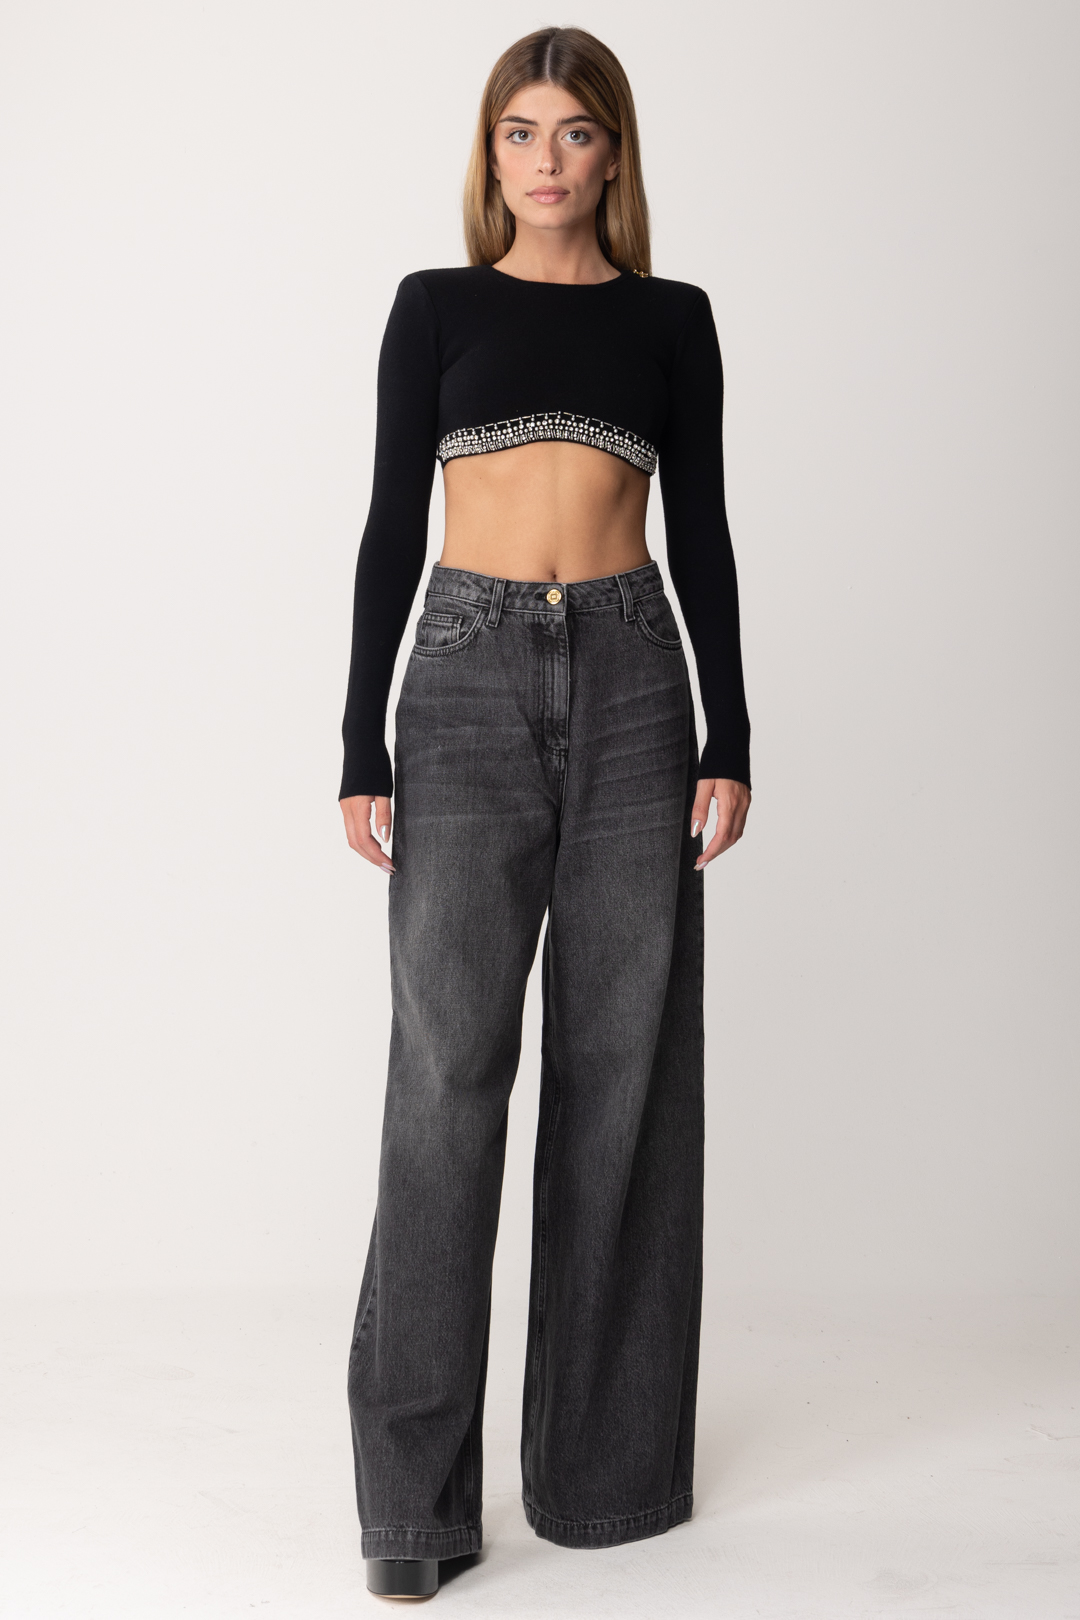 Preview: Elisabetta Franchi Crop top with embroidered bottom Nero